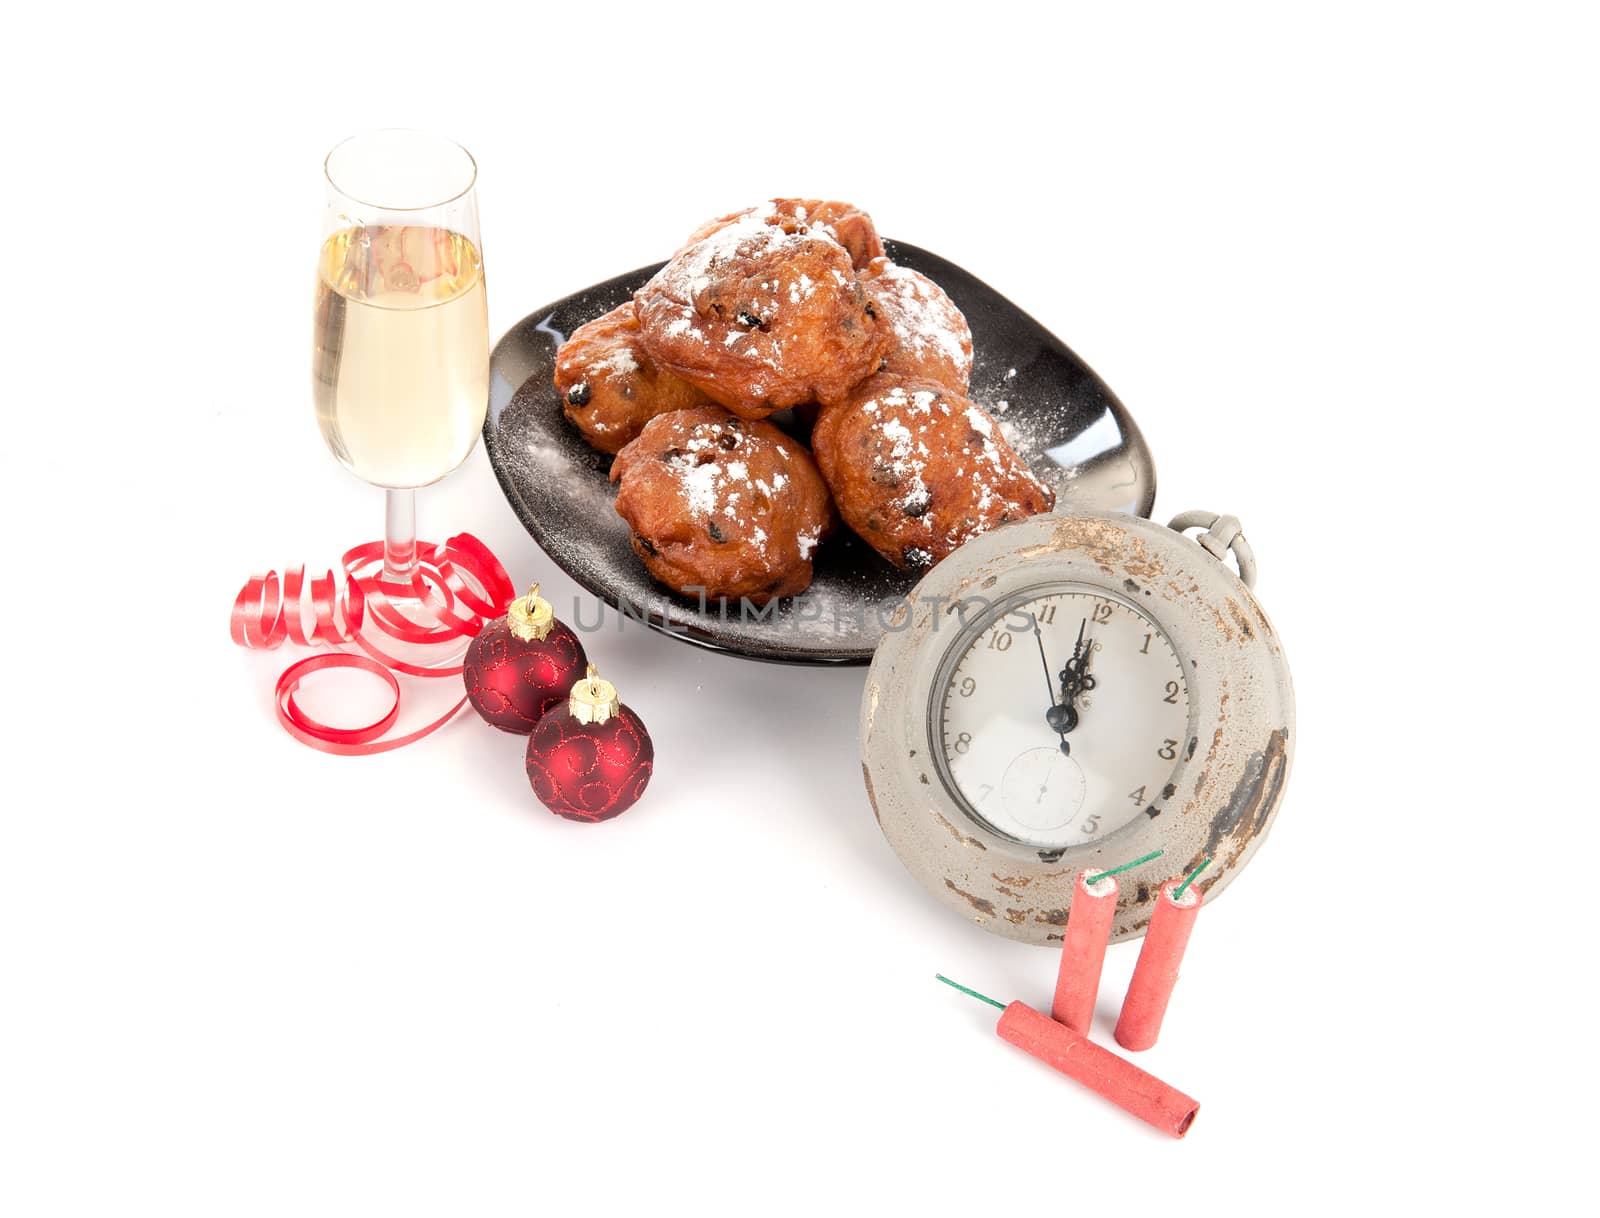 Celebrating new year with champagne, oliebollen and firework!